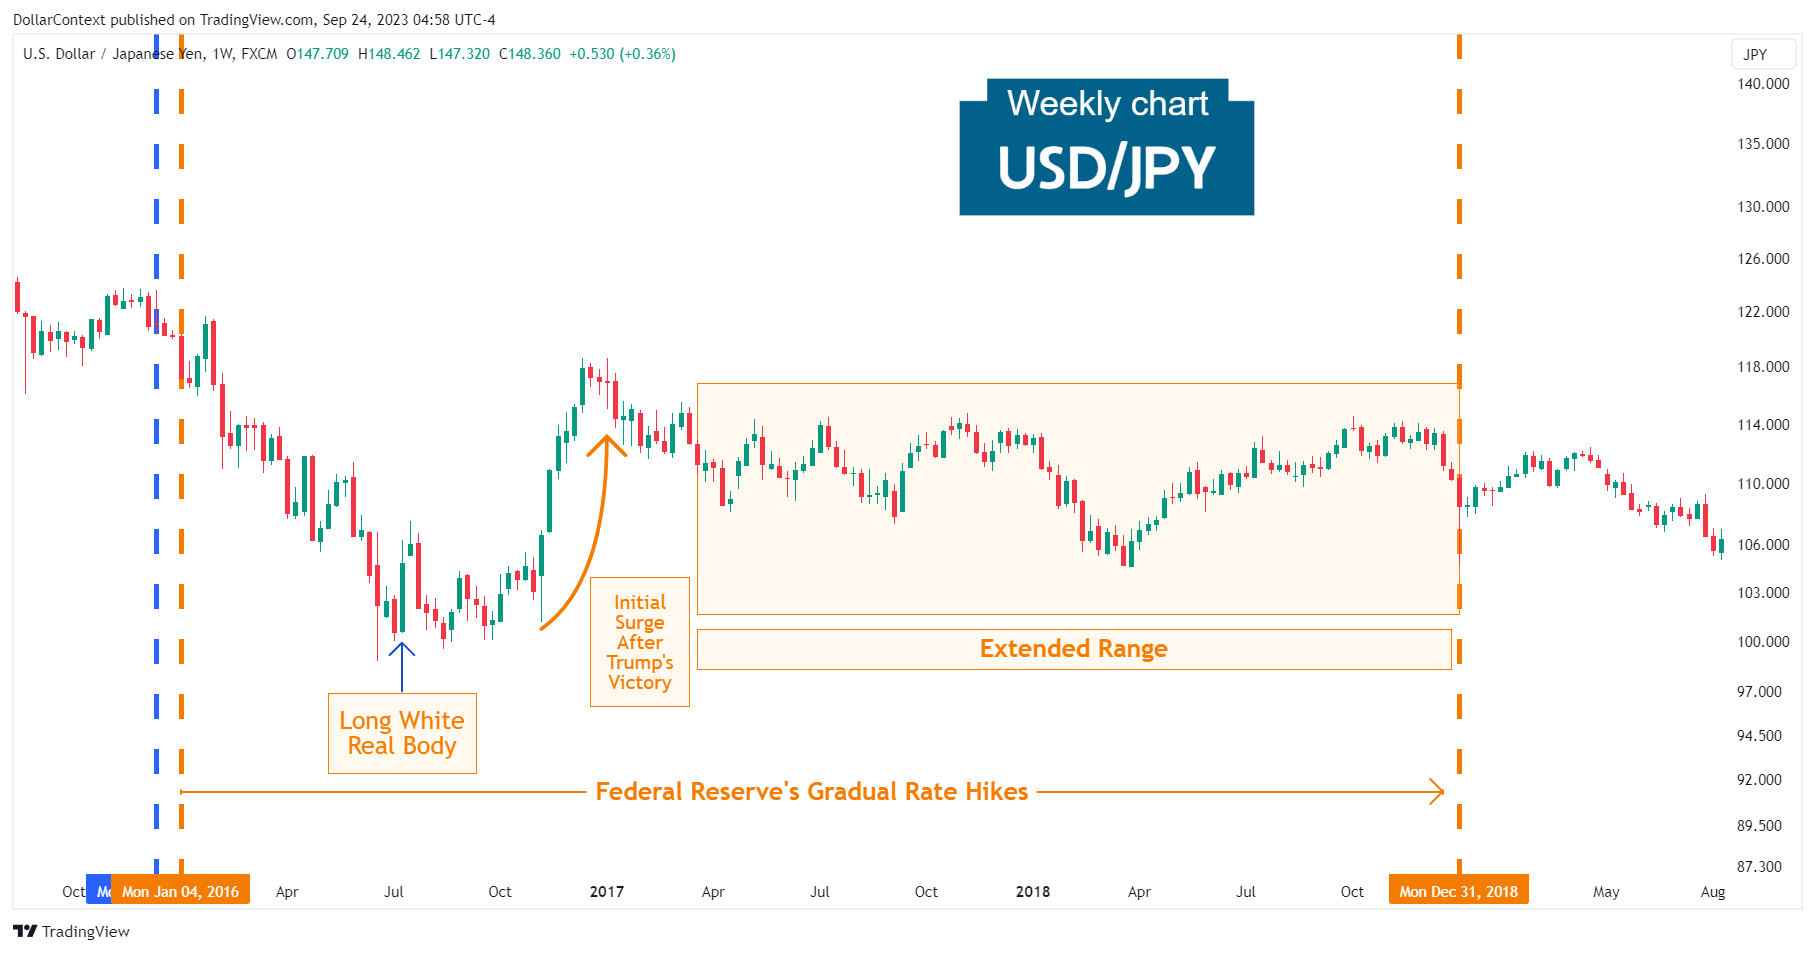 USD/JPY: Sideways Range After the Presidential Election in November 2016 (Weekly Chart)